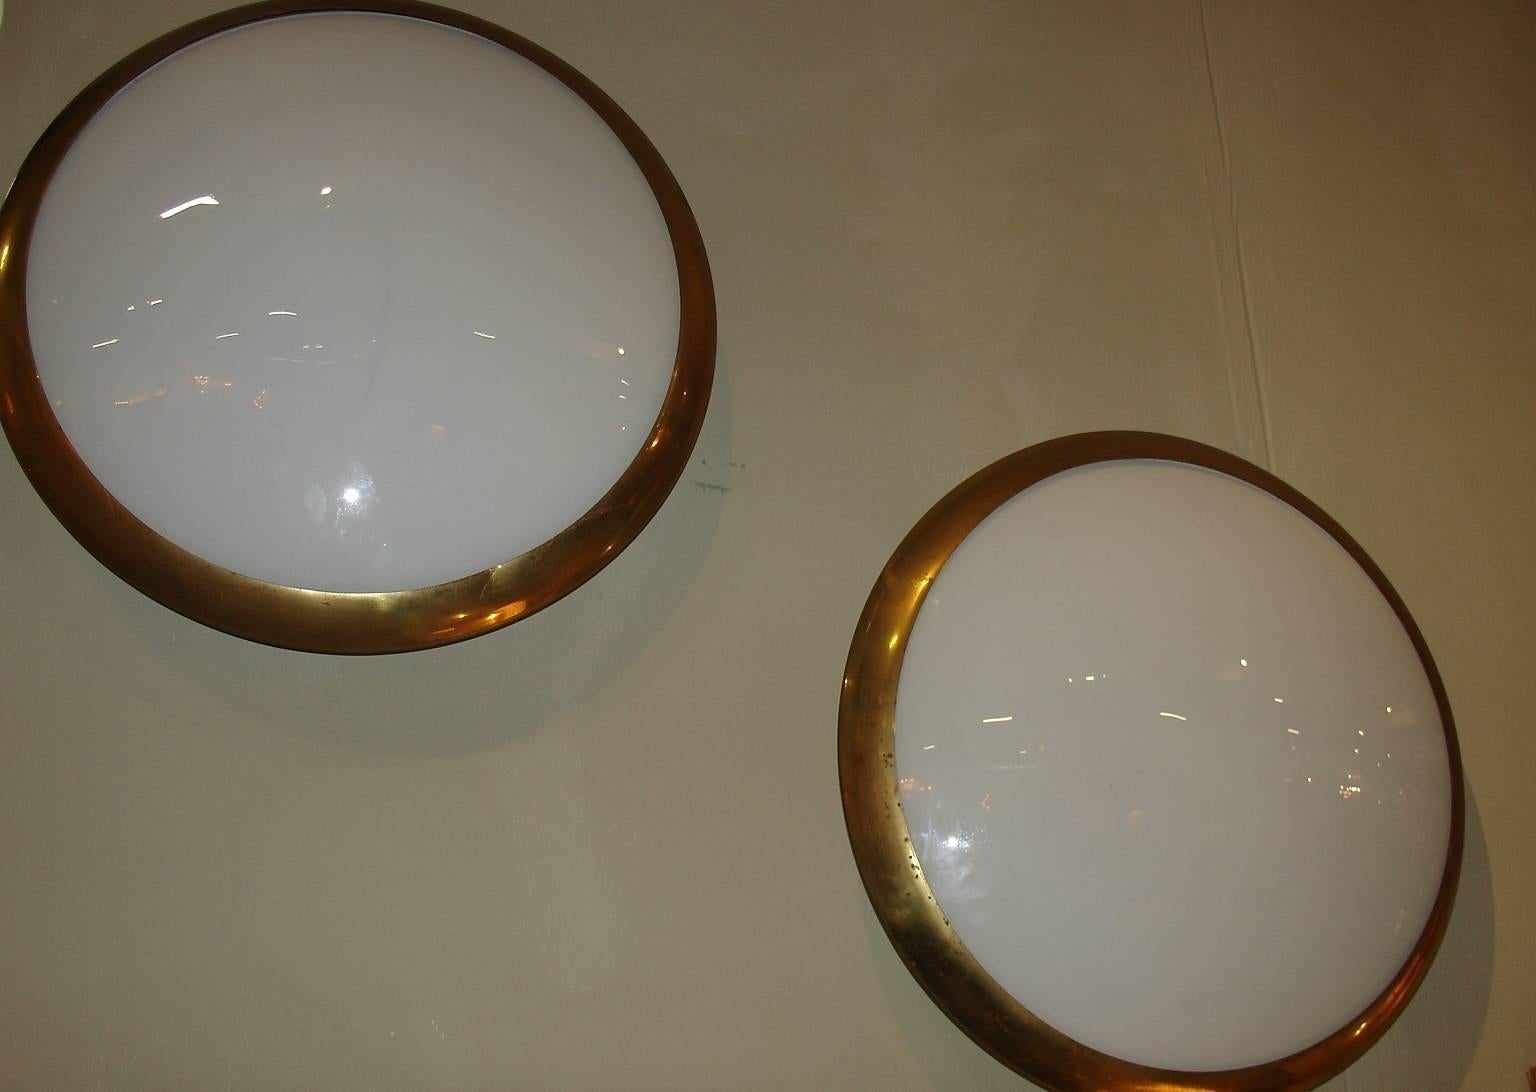 A pair of curved glazed glass and steel oxidised brass surround plafonniers/ceiling/wall lights designed by Fontana Arte referenced in the Fontana Arte book model 2262.
 Fontana Arte was founded in Milan in 1932 by Luigi Fontana and Gio Ponti and